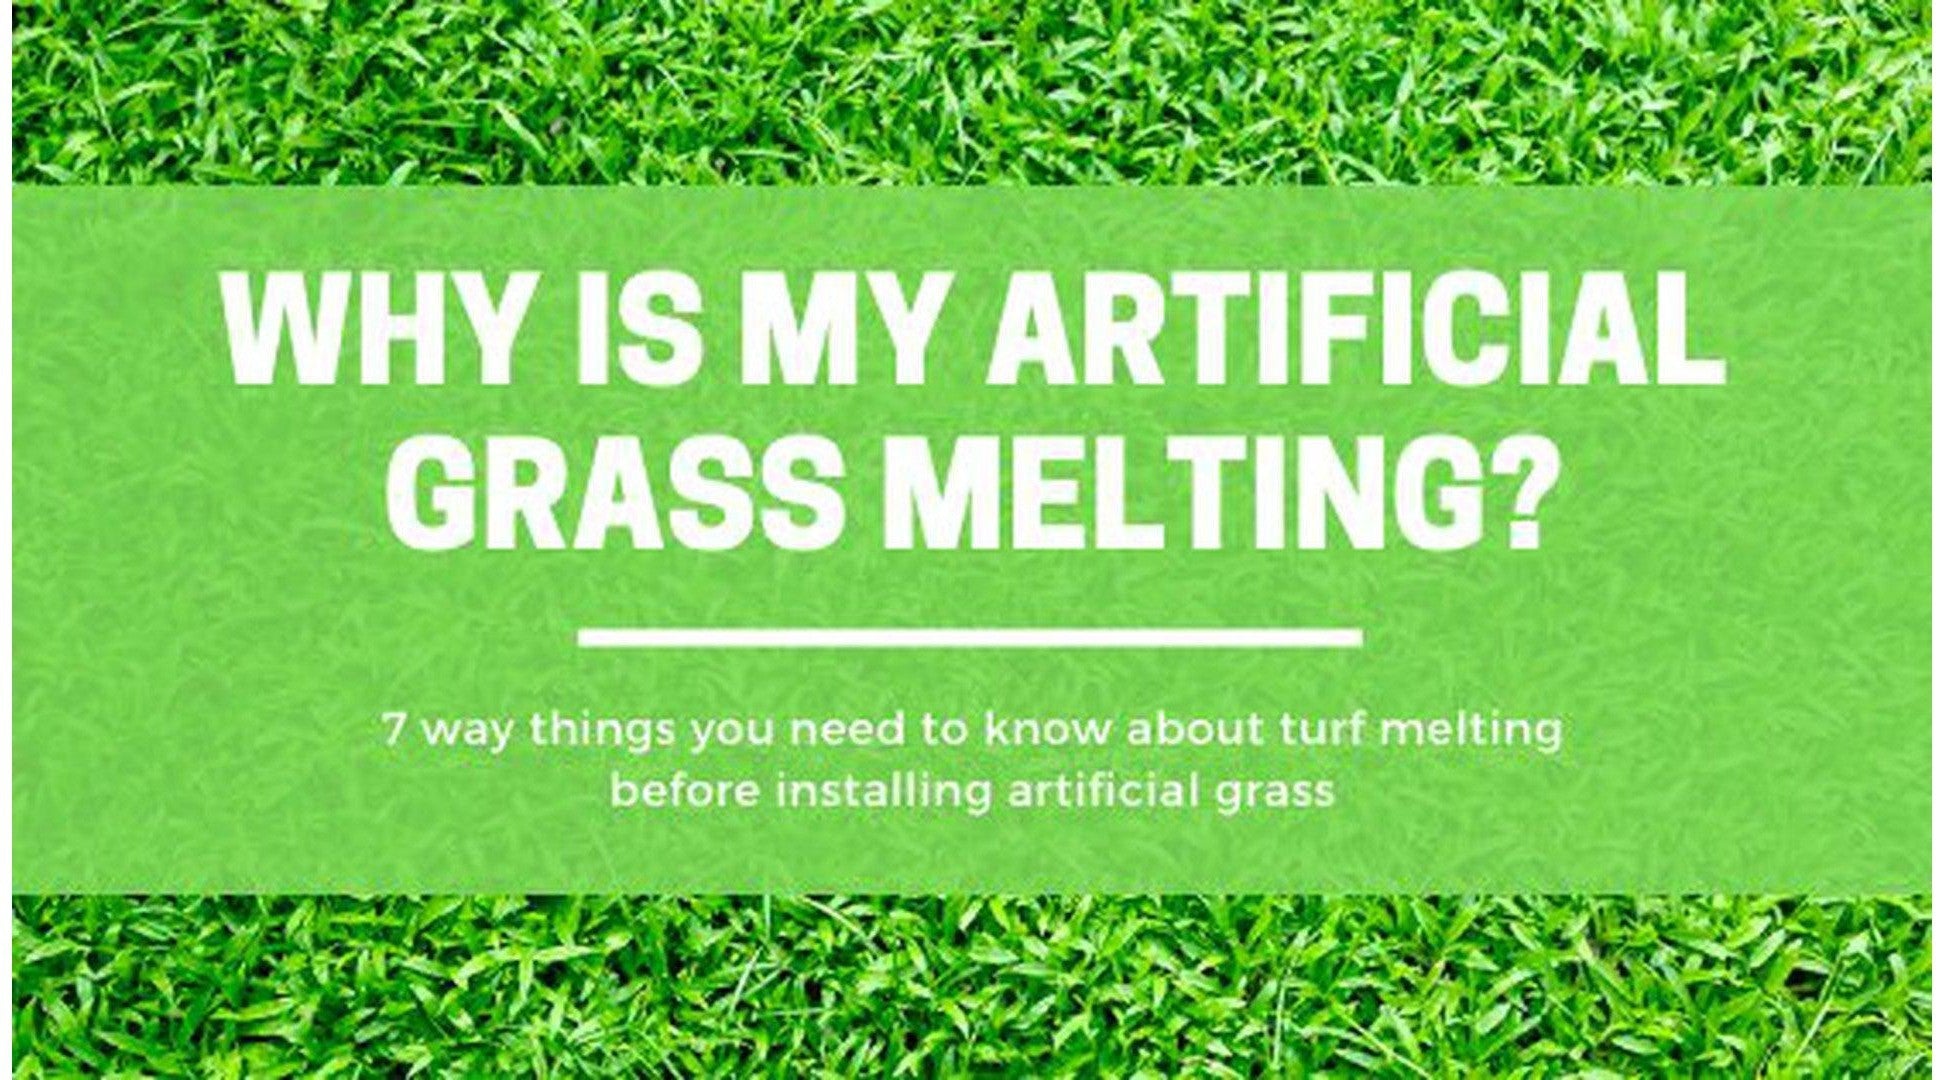 Why is my artificial grass melting?